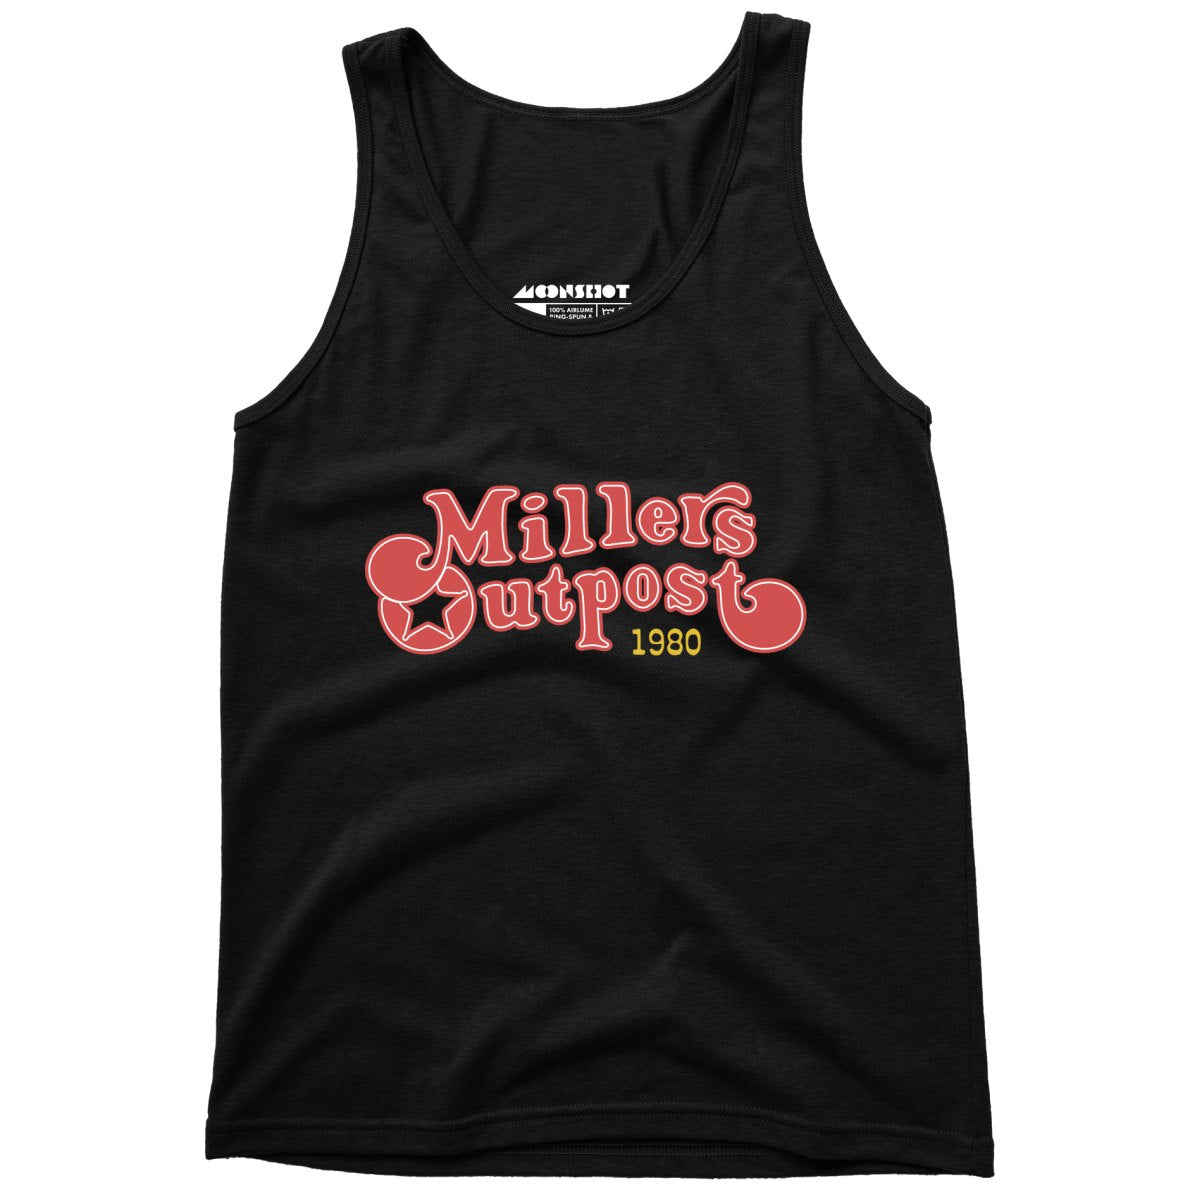 Millers Outpost - Unisex Tank Top